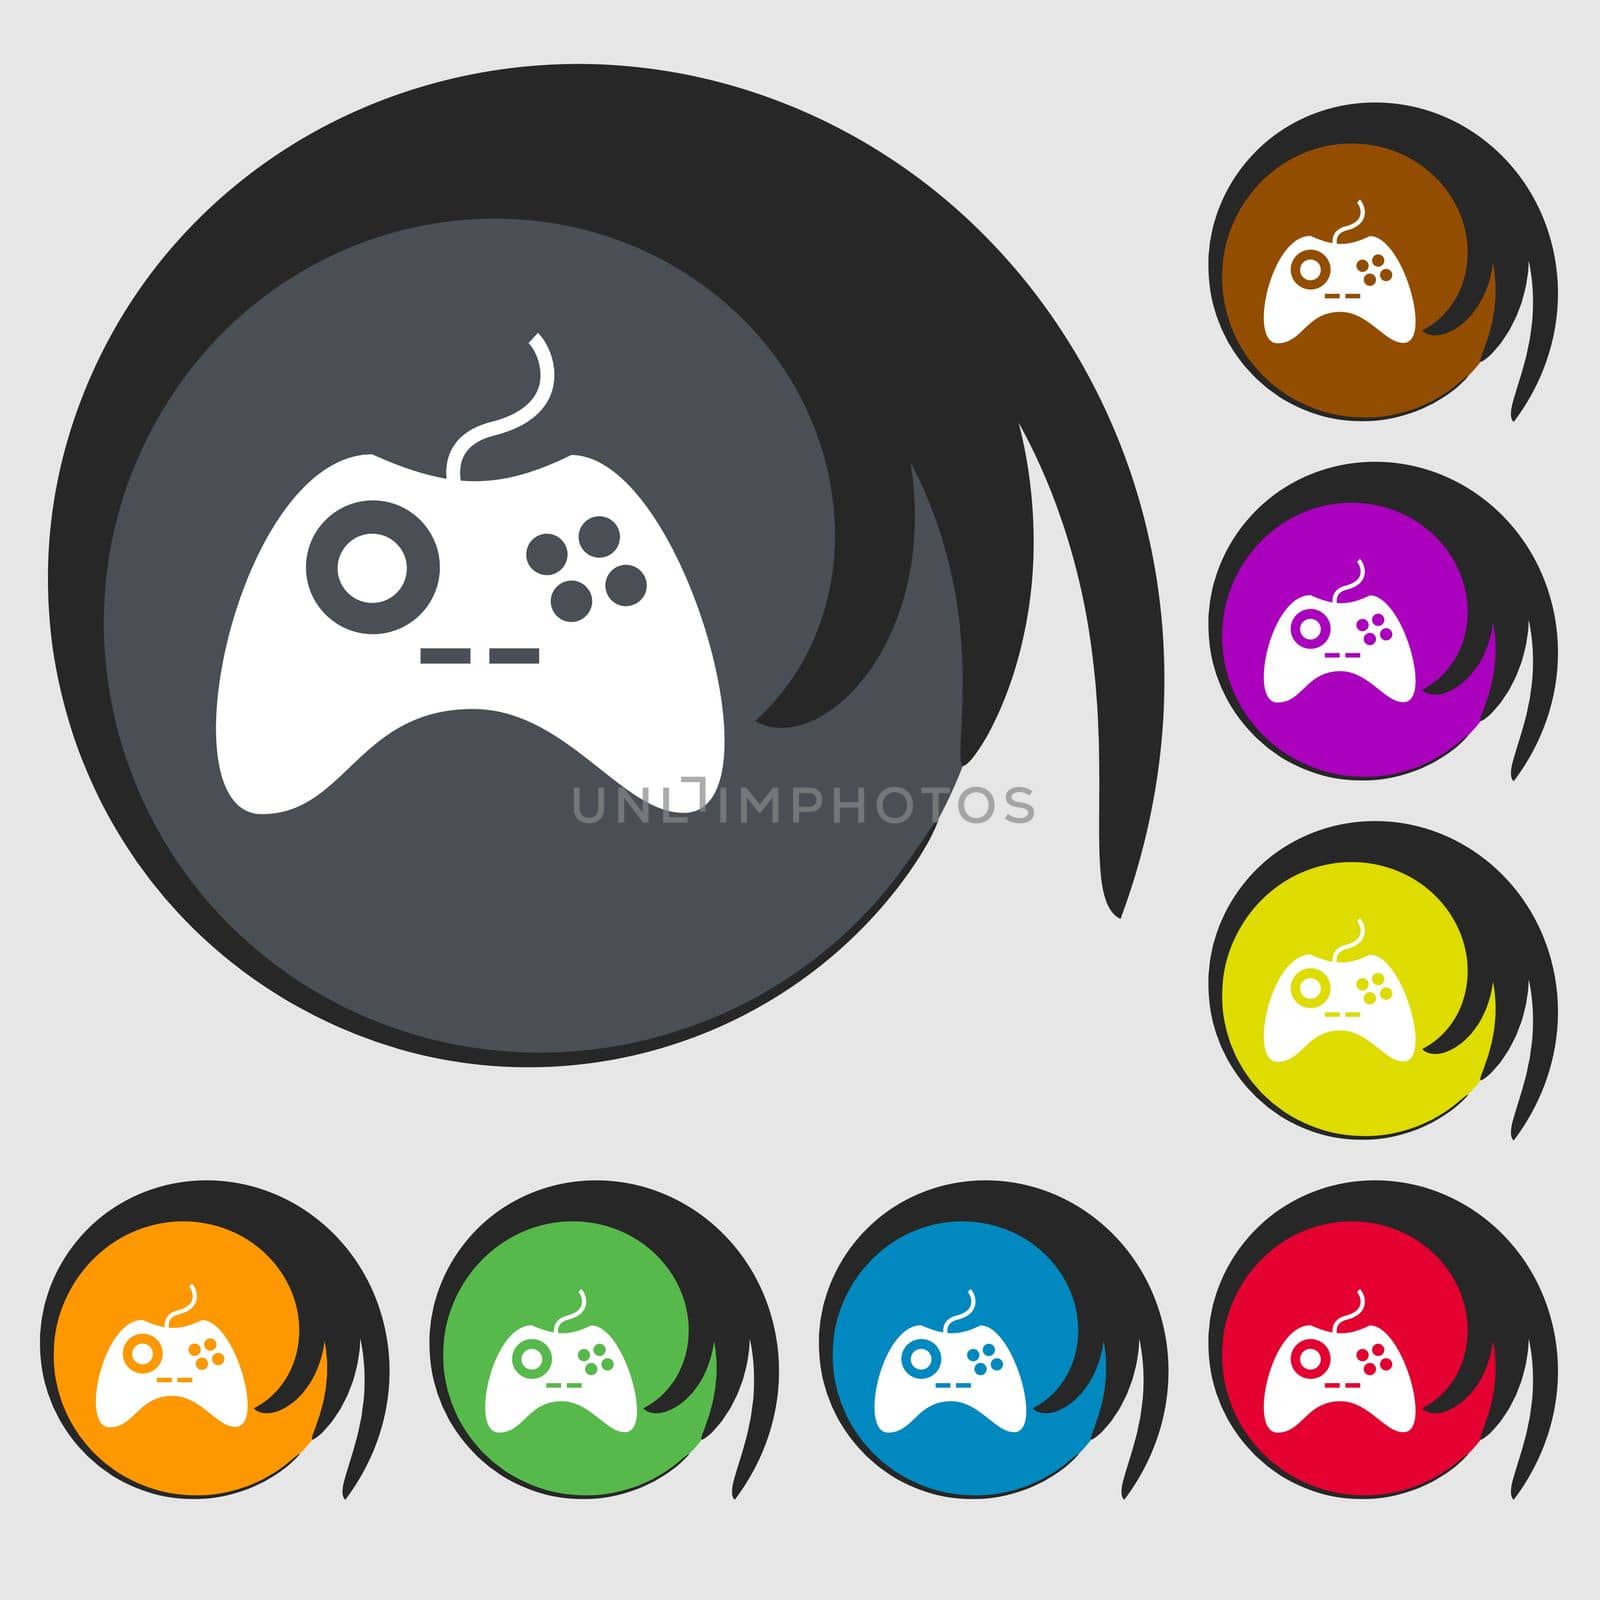 Joystick sign icon. Video game symbol. Symbols on eight colored buttons. illustration